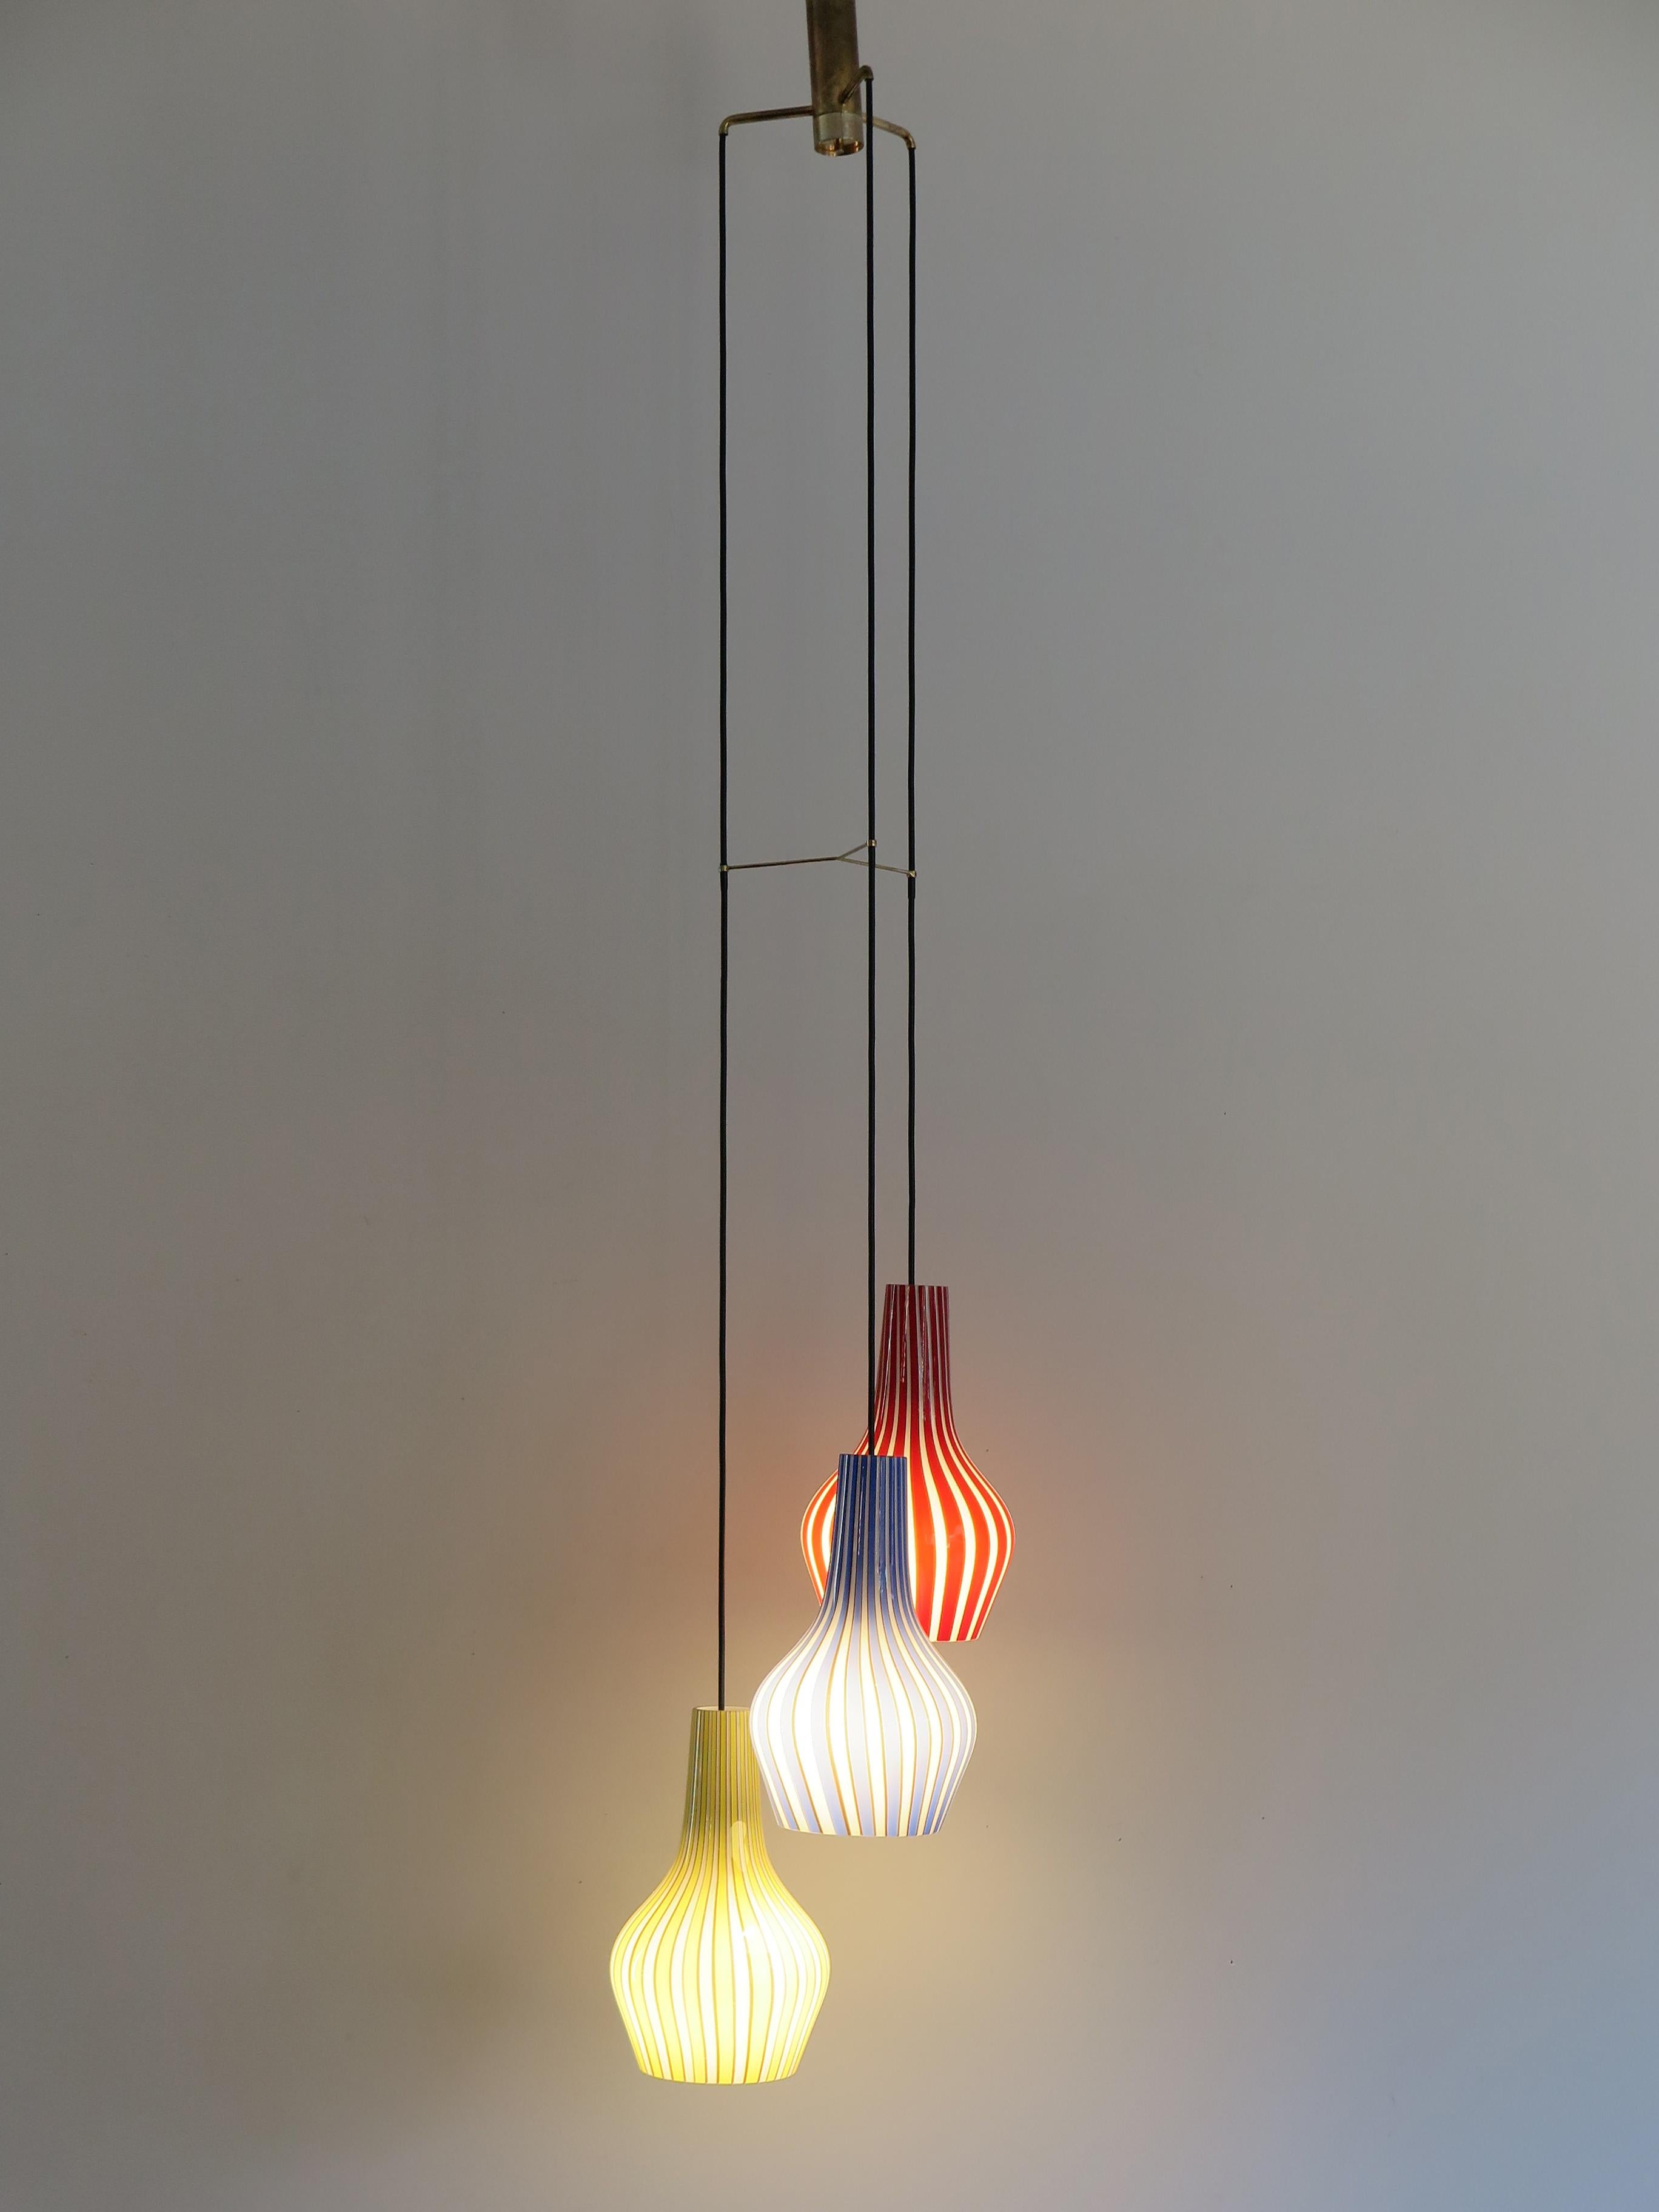 Tan France Auction Pick

Italian midcentury modern design glass pendant lamp designed by Flavio Poli for Seguso Vetri d'Arte ‘Art glass’ with red, yellow and blue lined striped glass diffusers and with inner white casing, brass details,
Italy